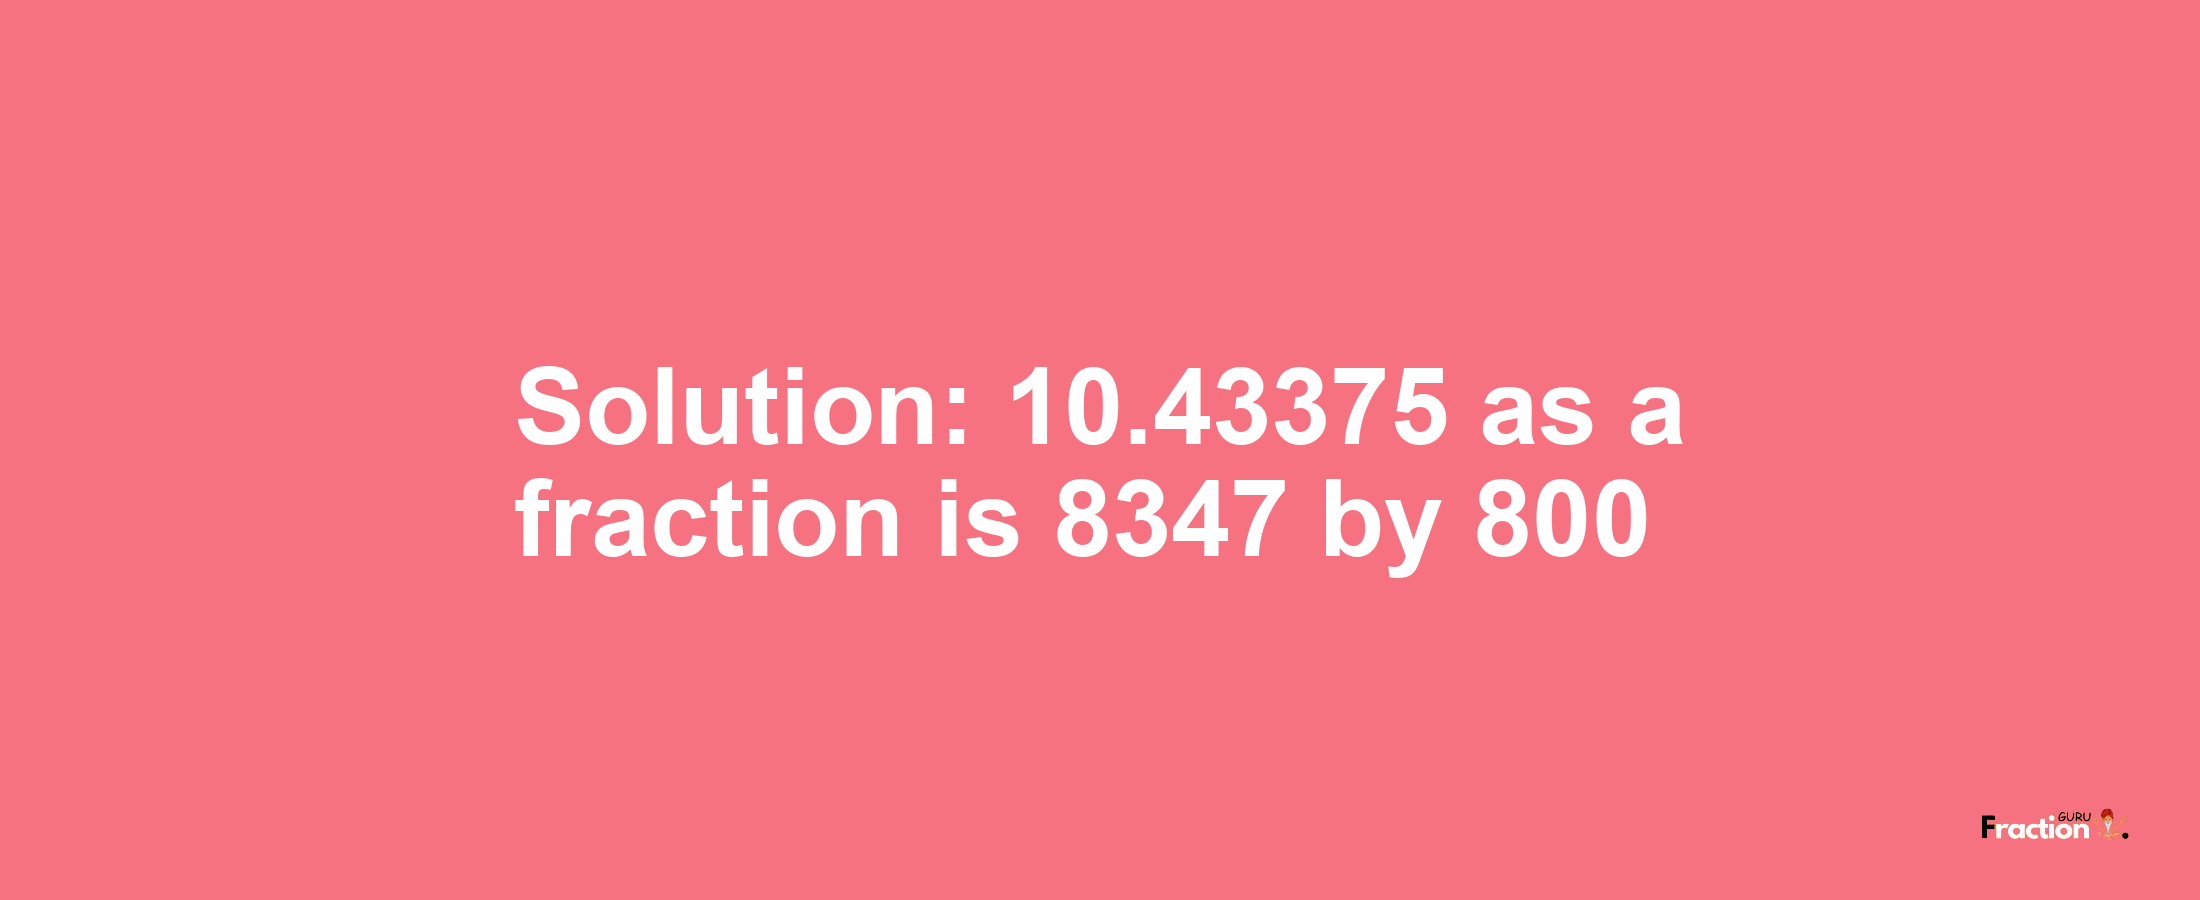 Solution:10.43375 as a fraction is 8347/800